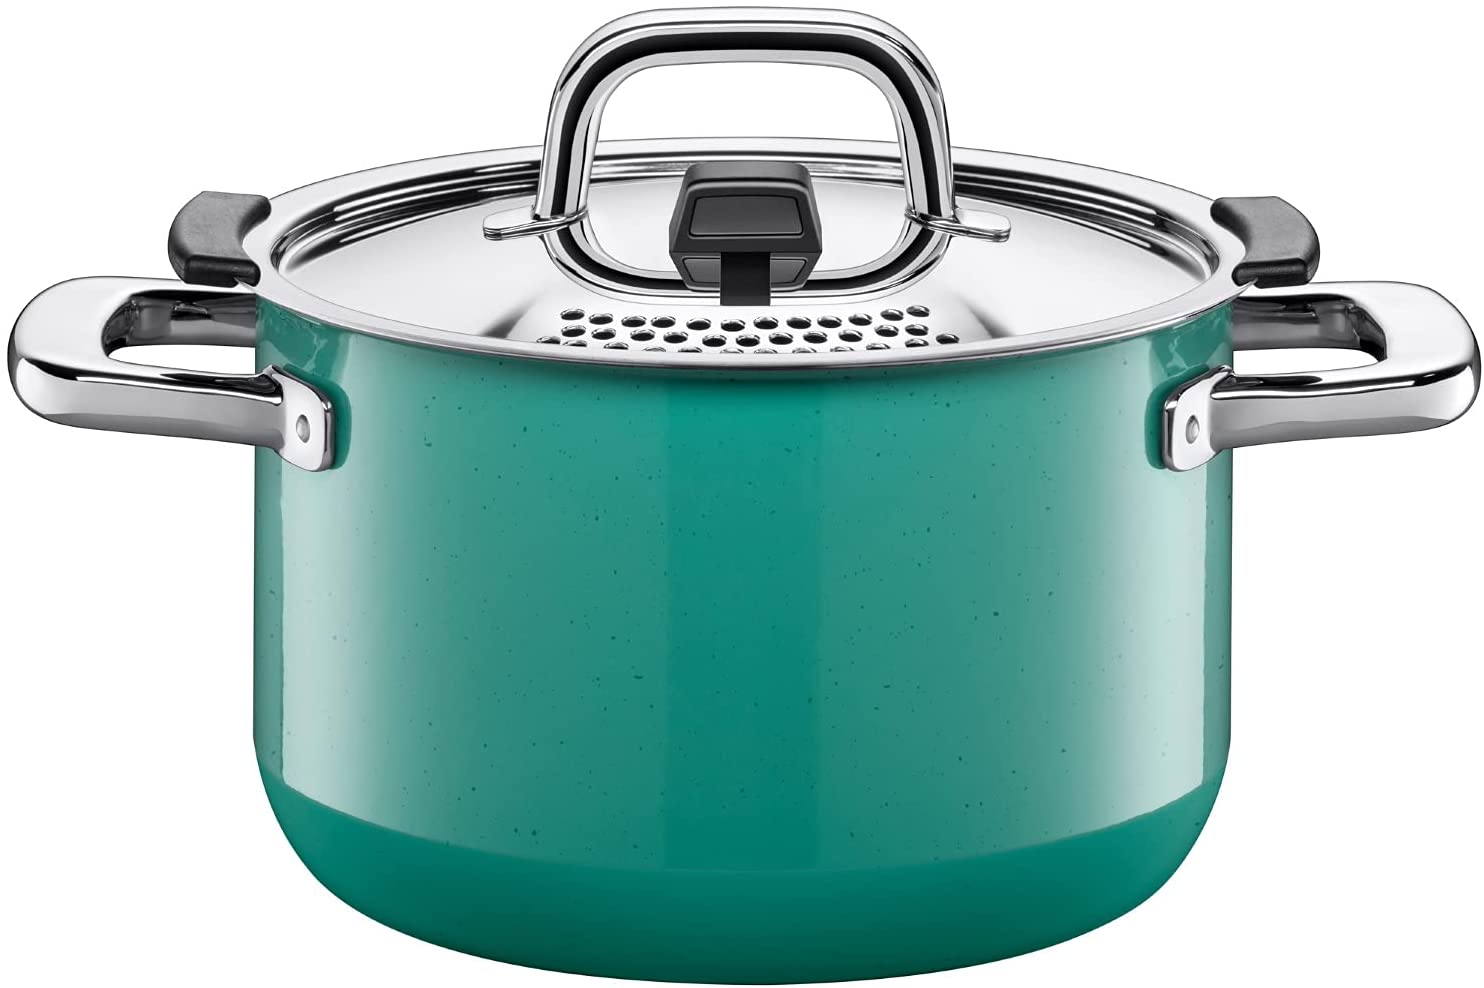 Silit 2102299264 Natural Tall Cooking Pot Diameter 20 cm 3.7 Litre Green Enamel & Function Control Lid Metal Silargan Function Lid Ceramic Suitable for Induction Cookers Dishwasher Safe